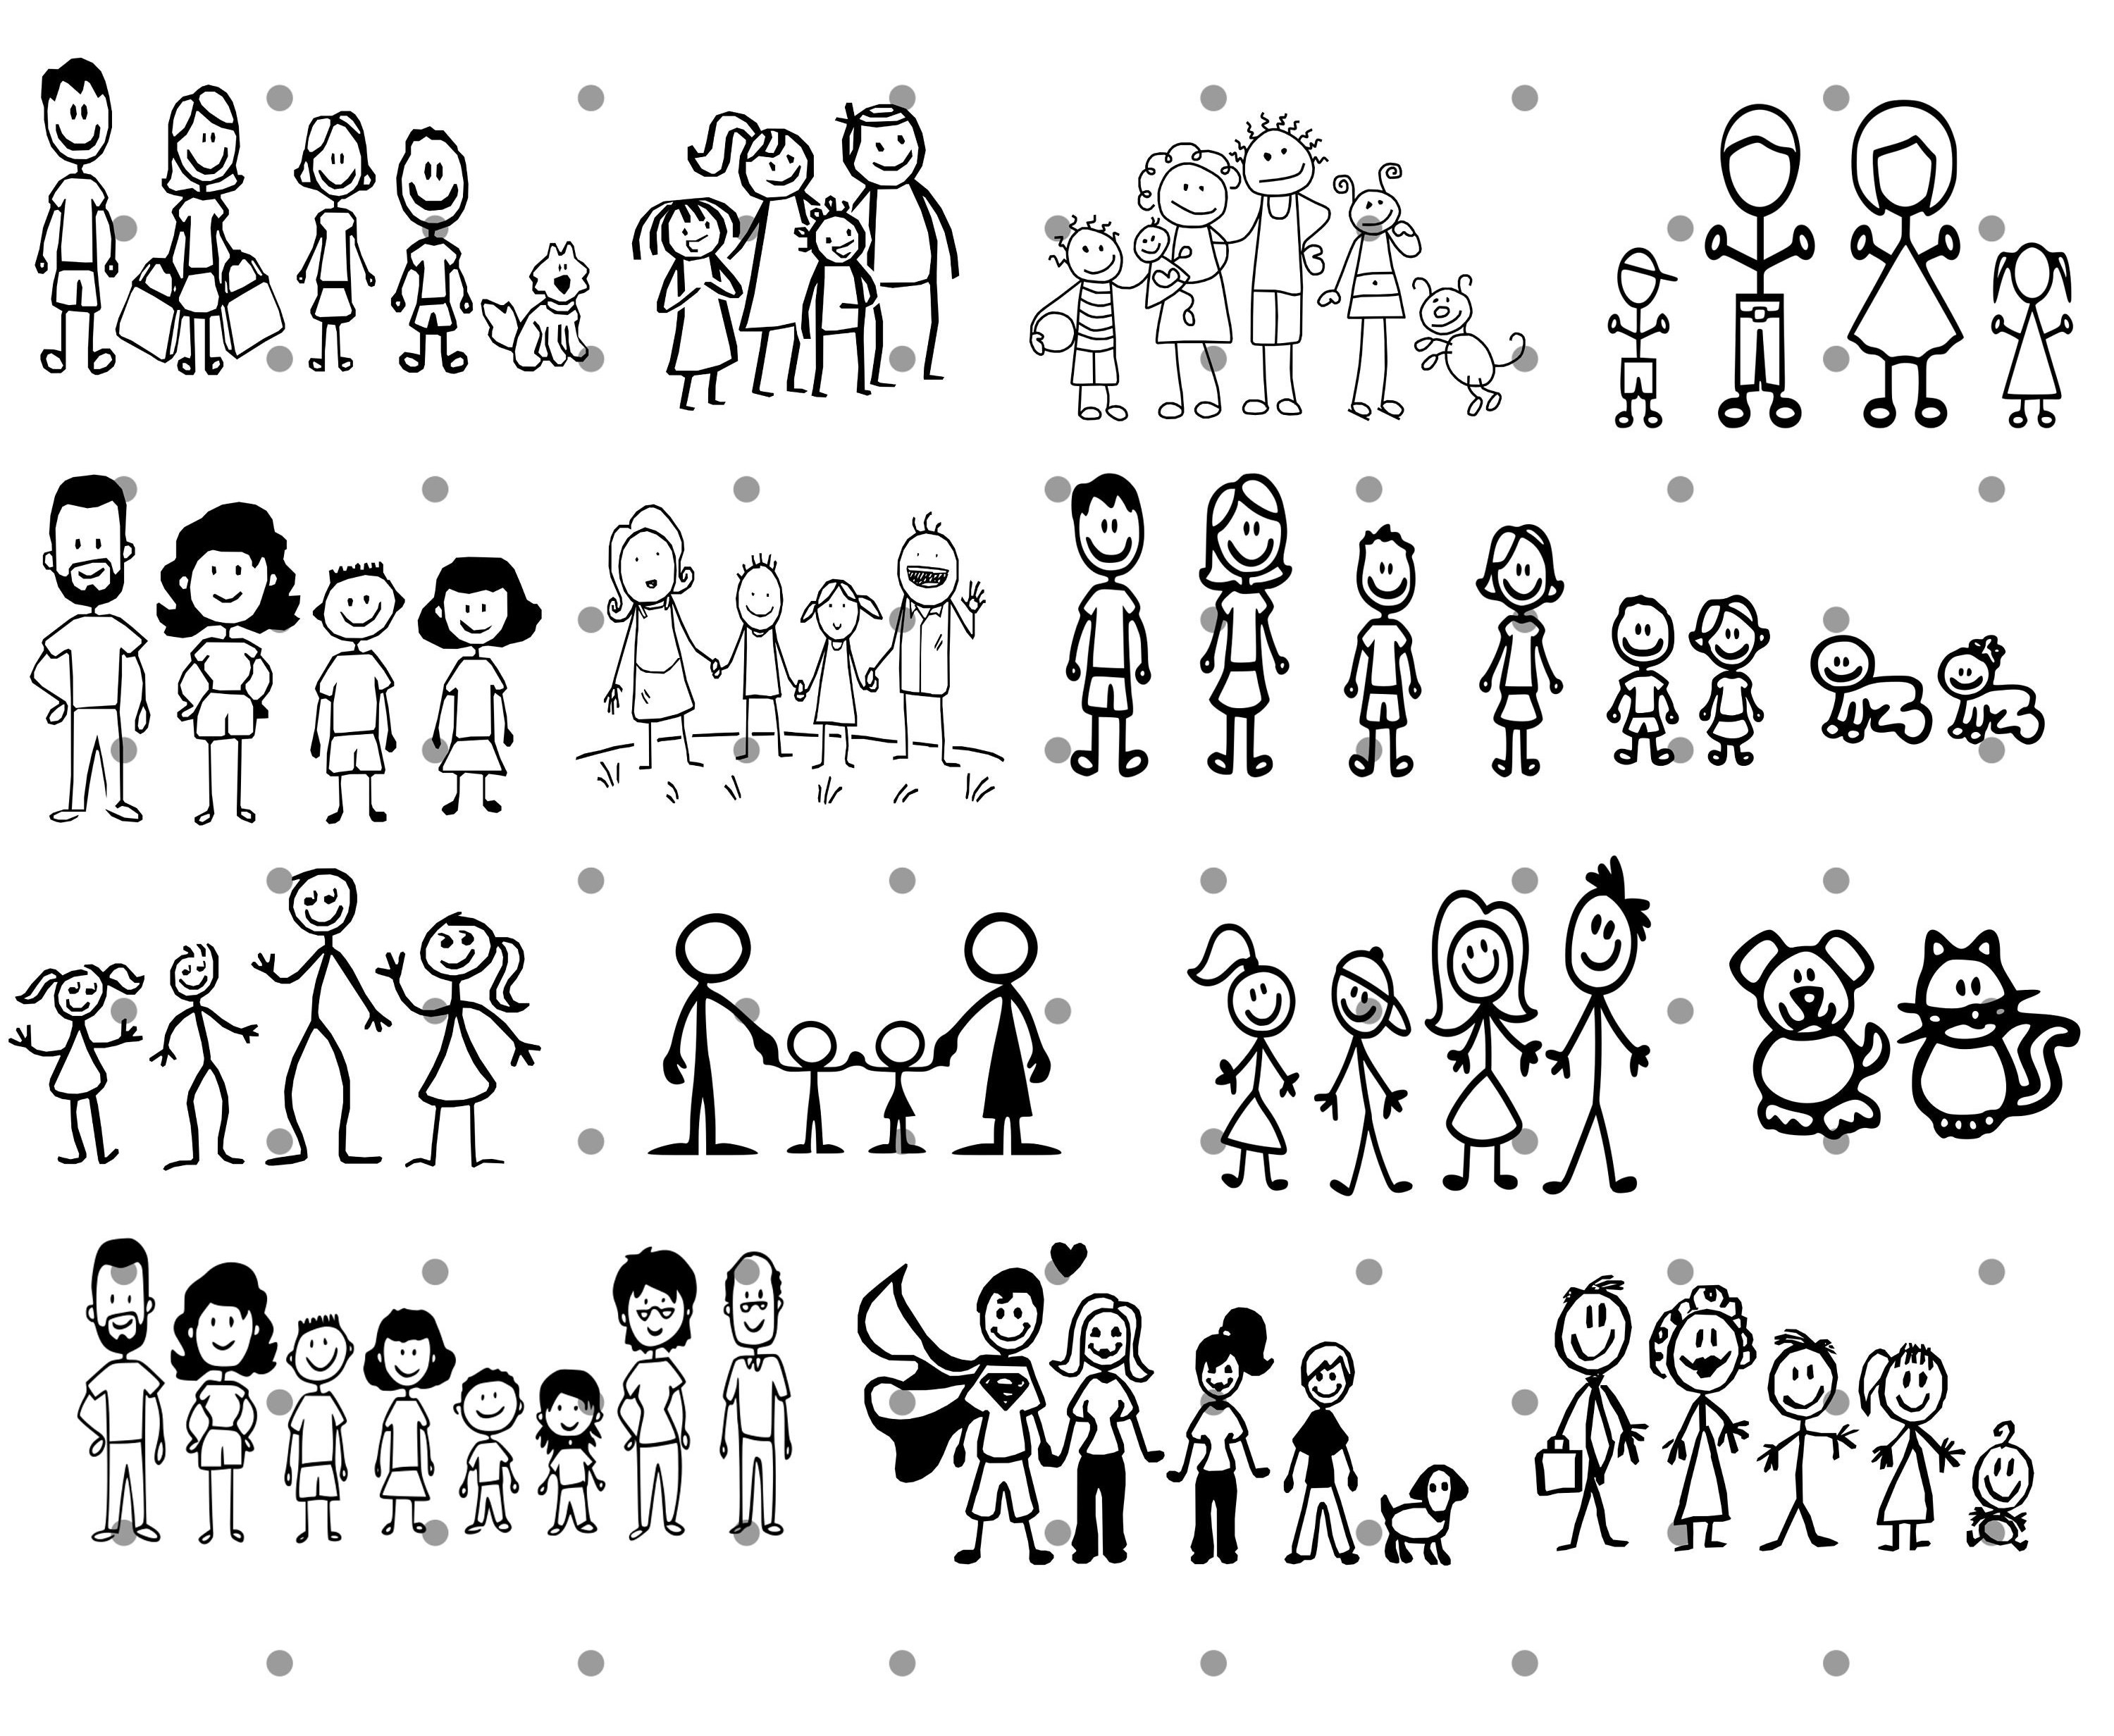 Family stick figure drawing Mounted Print by quali-shirts